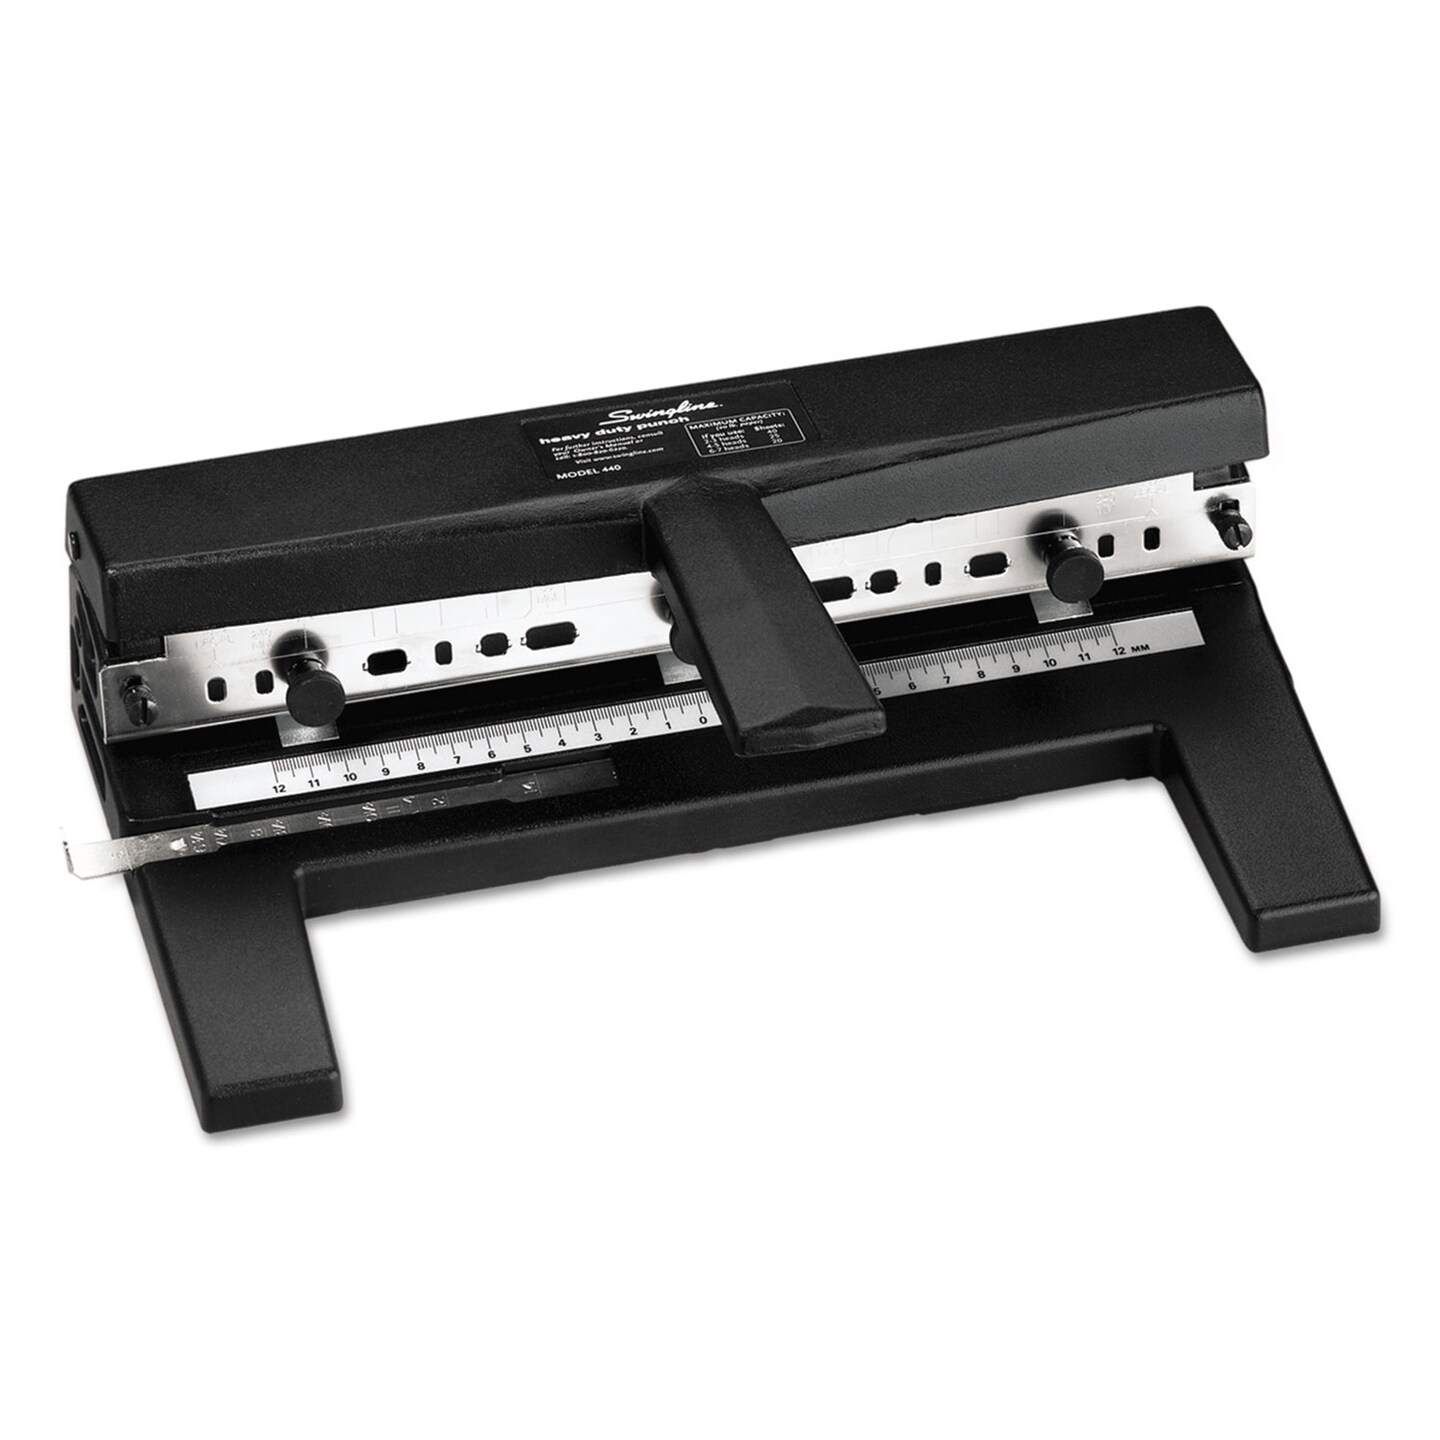 Two Or Three Hole Punch 12 Sheet Capacity